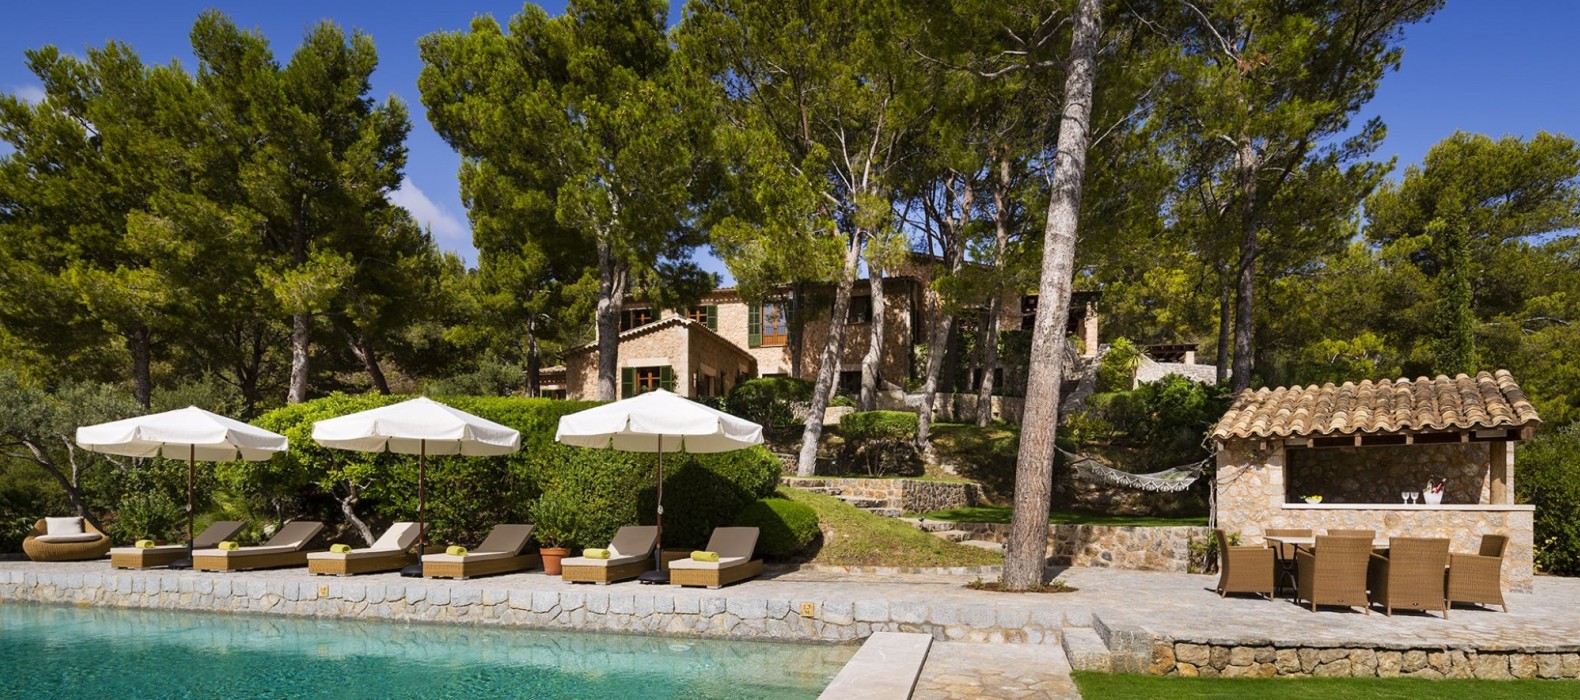 Exterior pool area with bbq of Villa Foreste in Mallorca